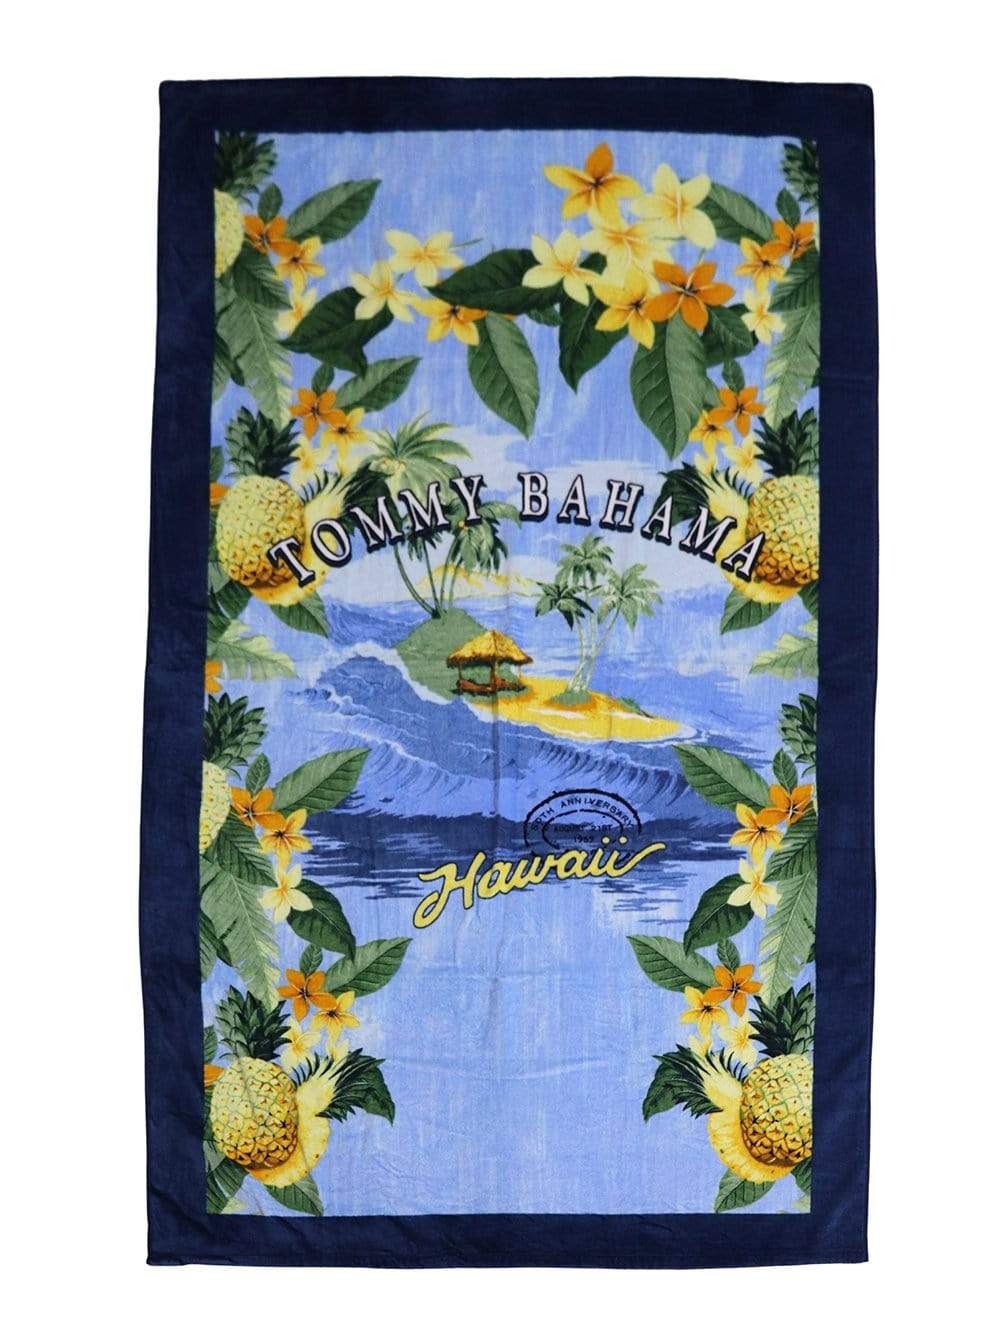 TOMMY BAHAMA Towels 89cx167cm / Multi-Color TOMMY BAHAMA - Beach Towel